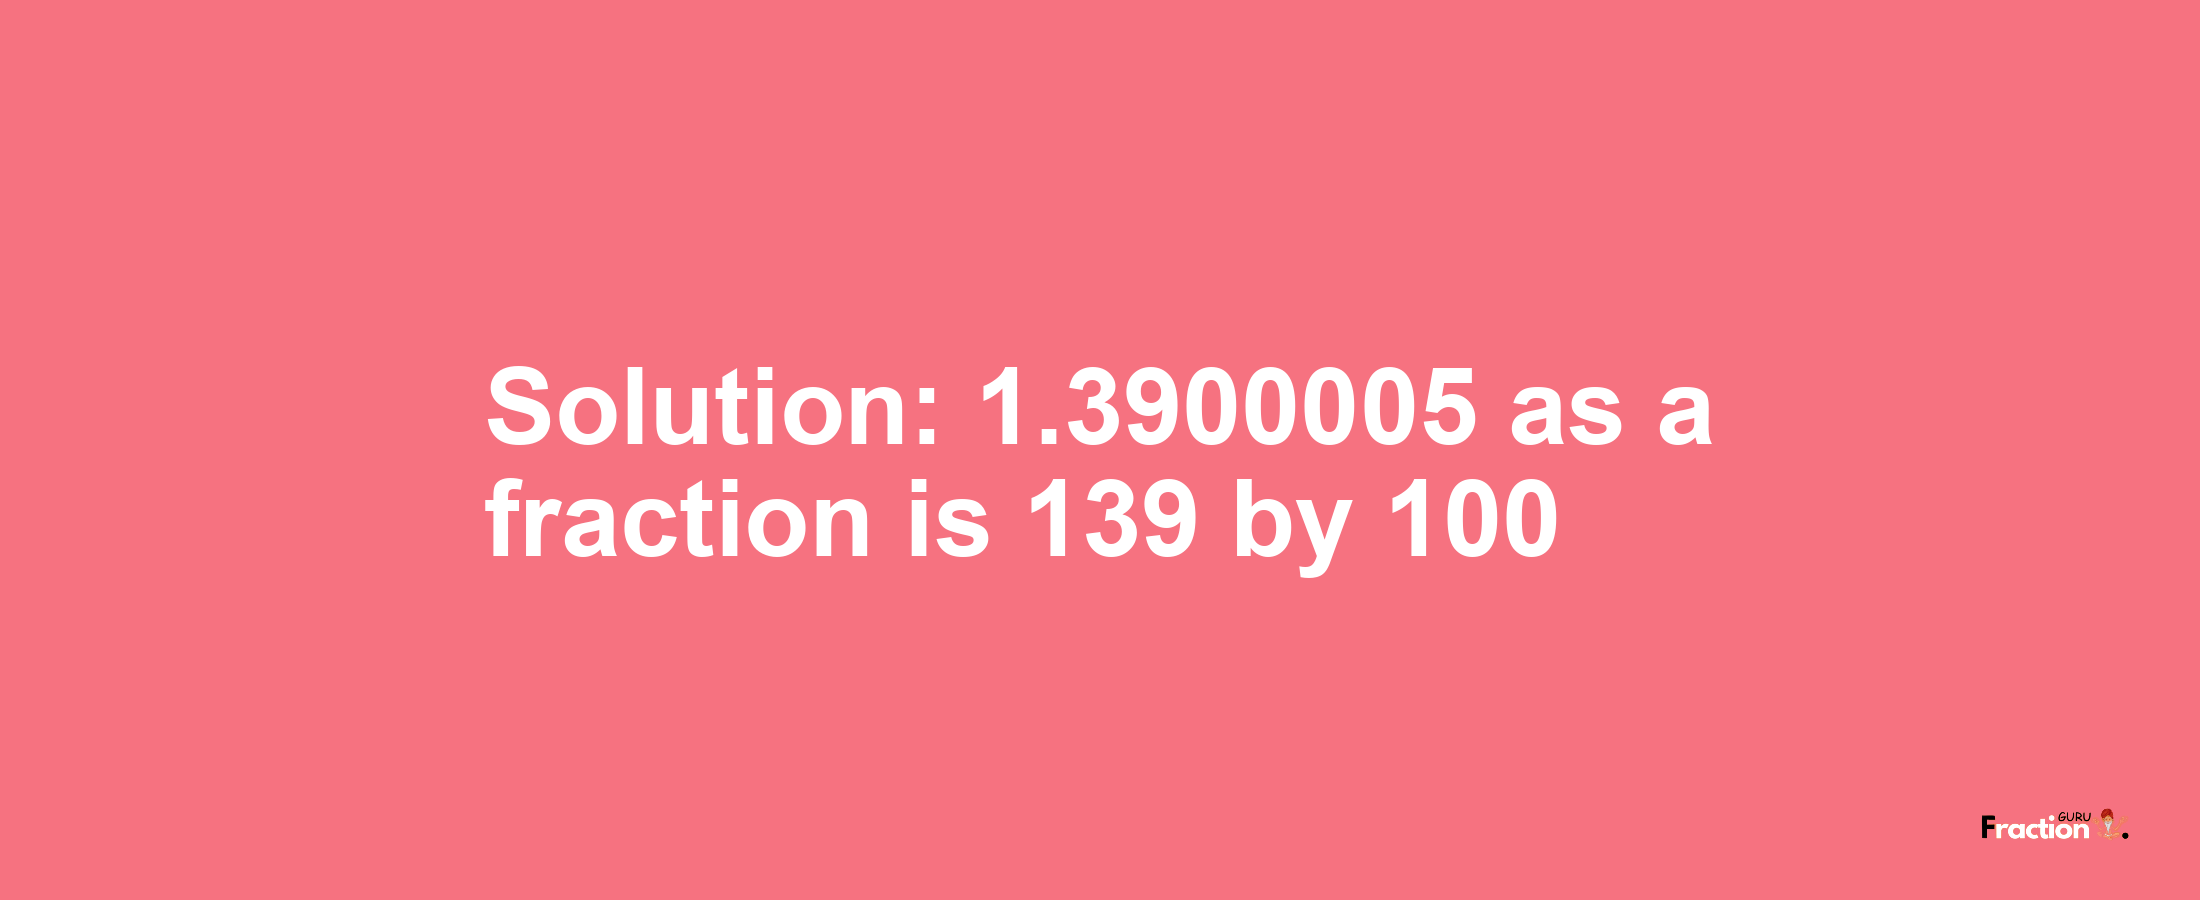 Solution:1.3900005 as a fraction is 139/100